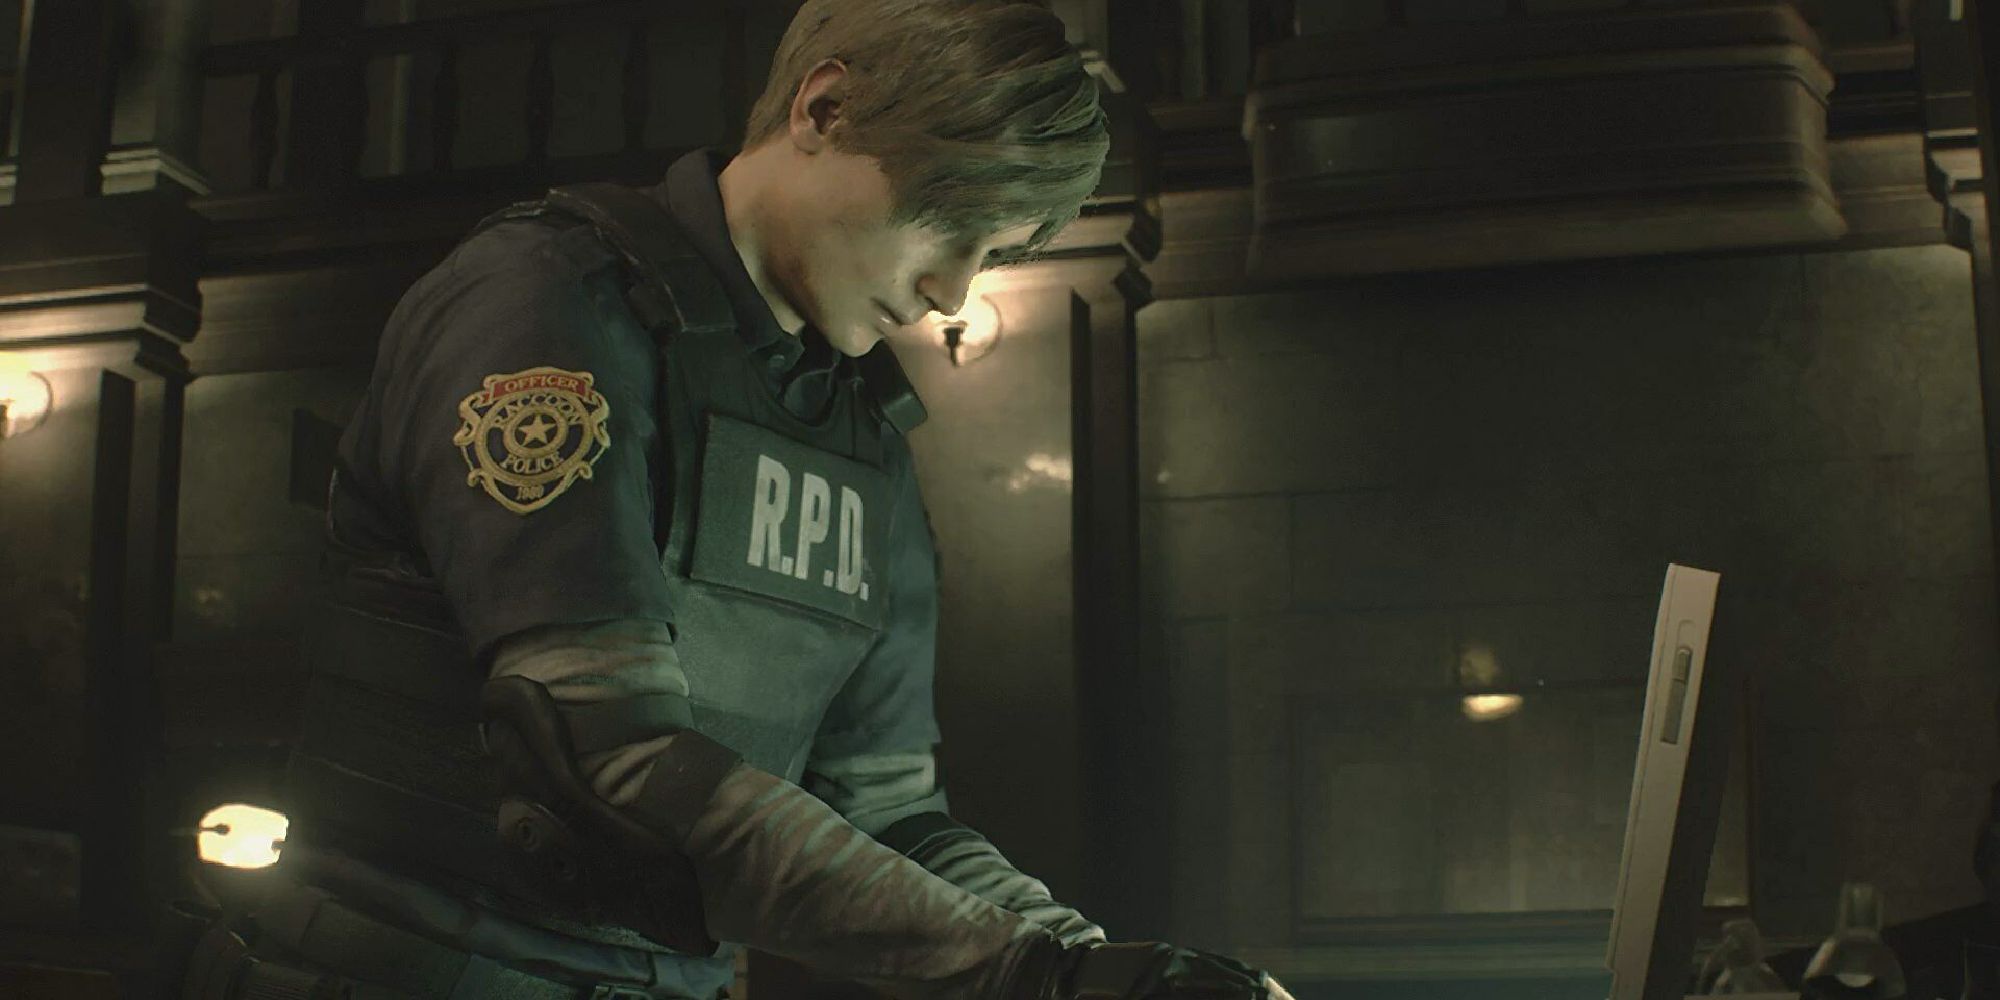 Leon as seen in the Resident Evil 2 Remake, typing at a computer terminal.